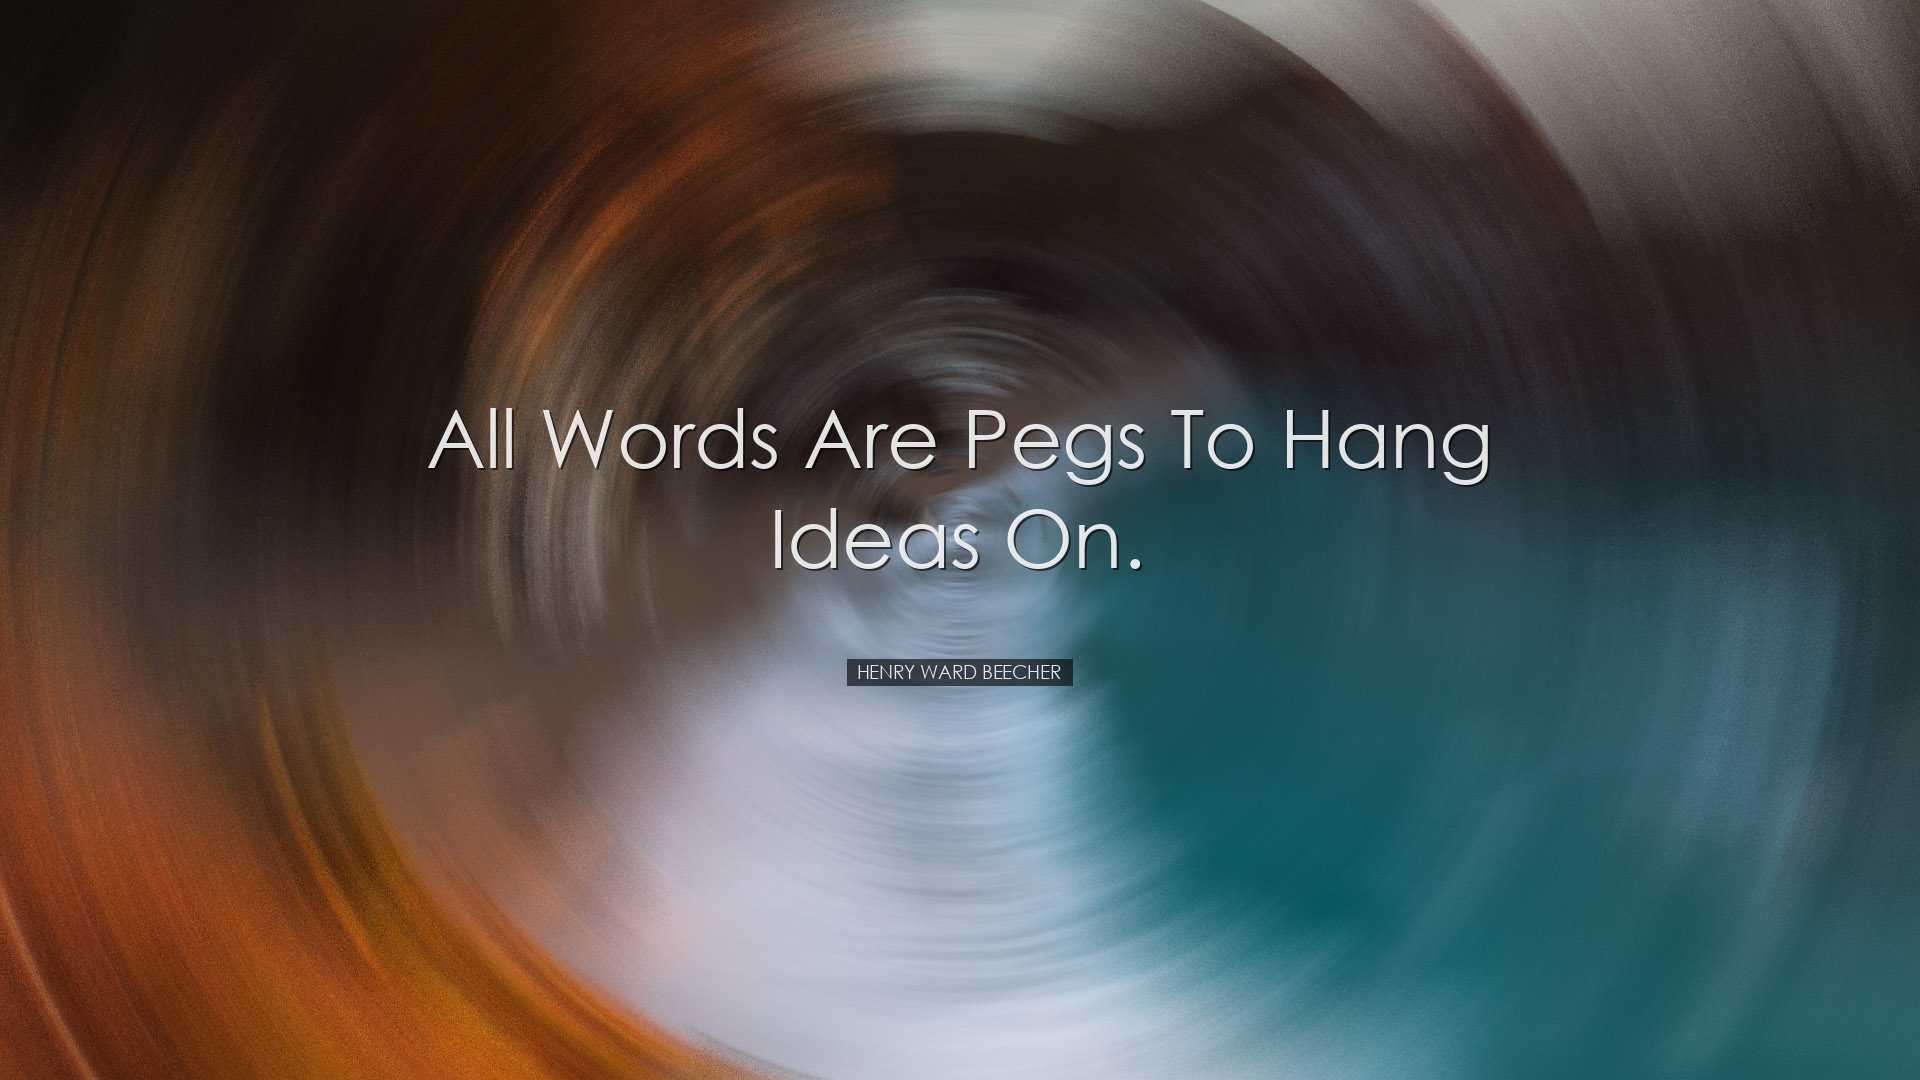 All words are pegs to hang ideas on. - Henry Ward Beecher